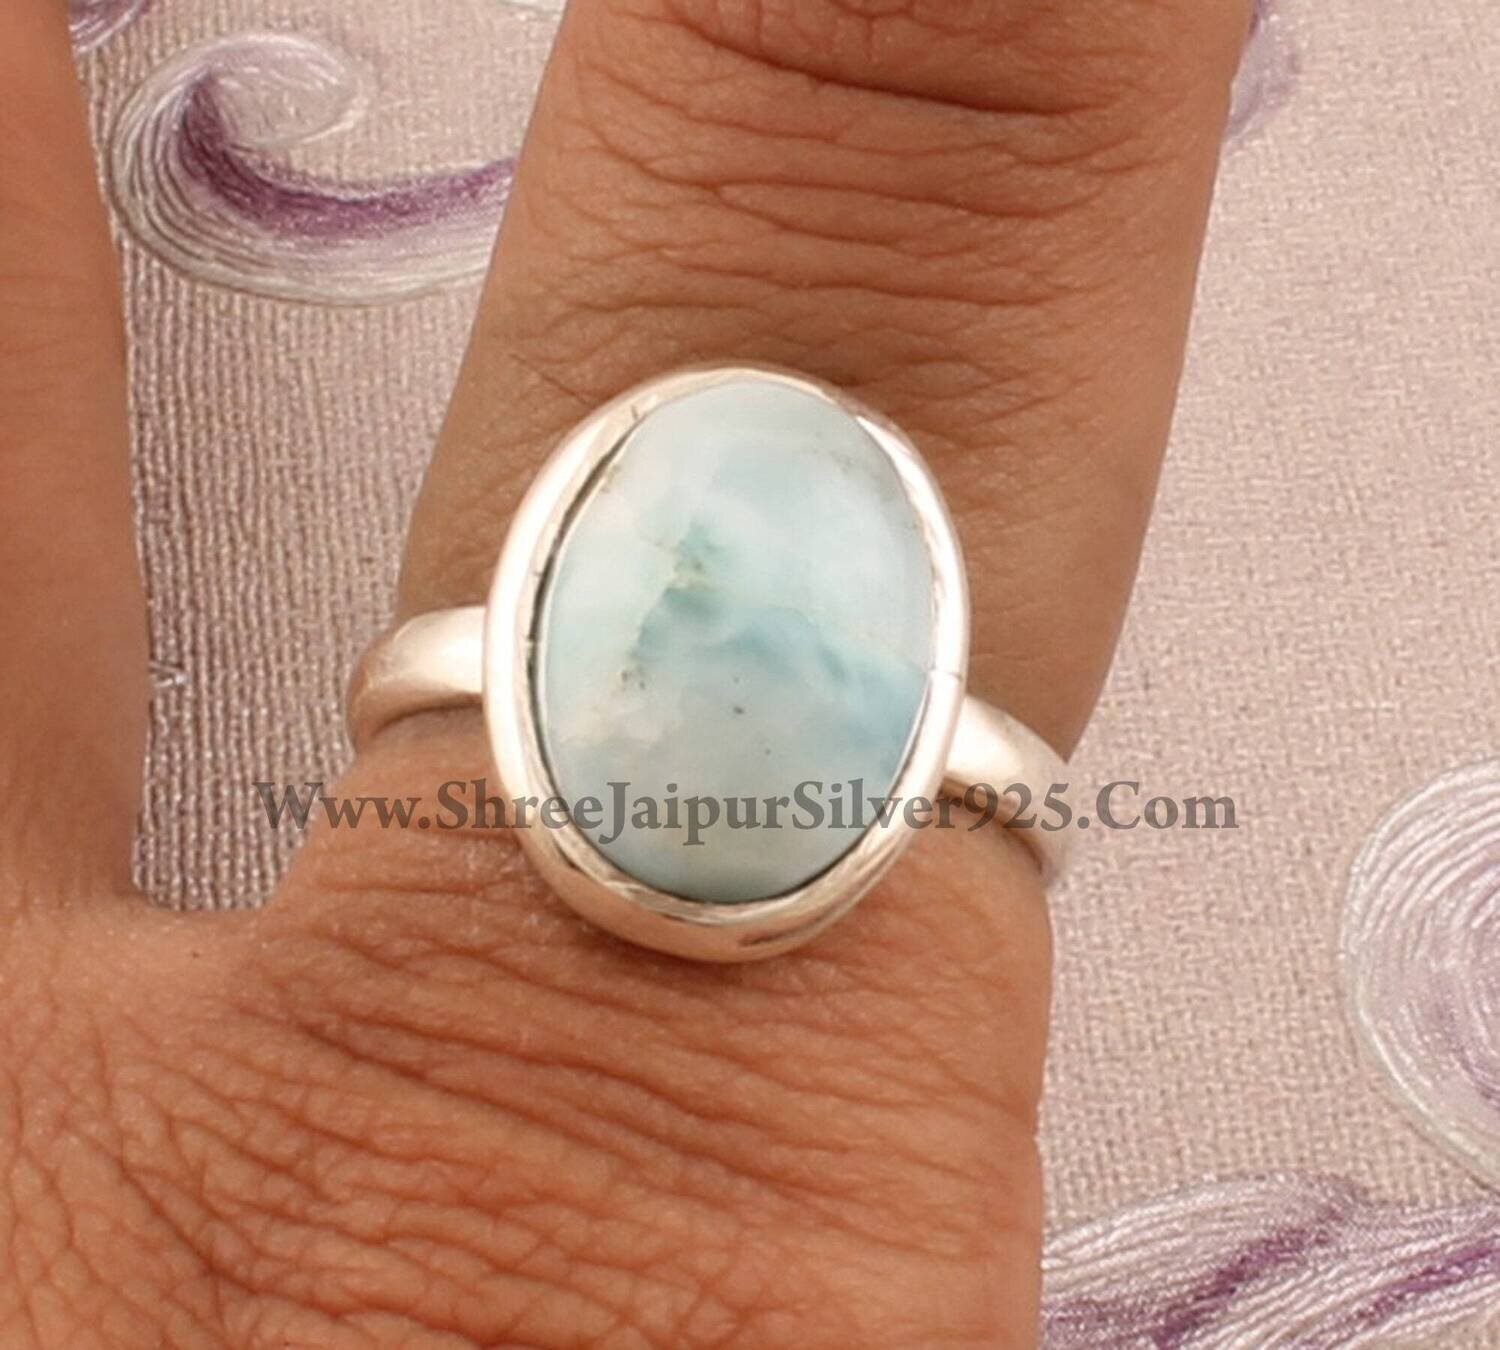 925 Sterling Silver Natural Larimar Oval Shape Gemstone Ring For Women, Larimar Solid Silver Ring For Her, Handmade Gemstone Ring Gift Idea